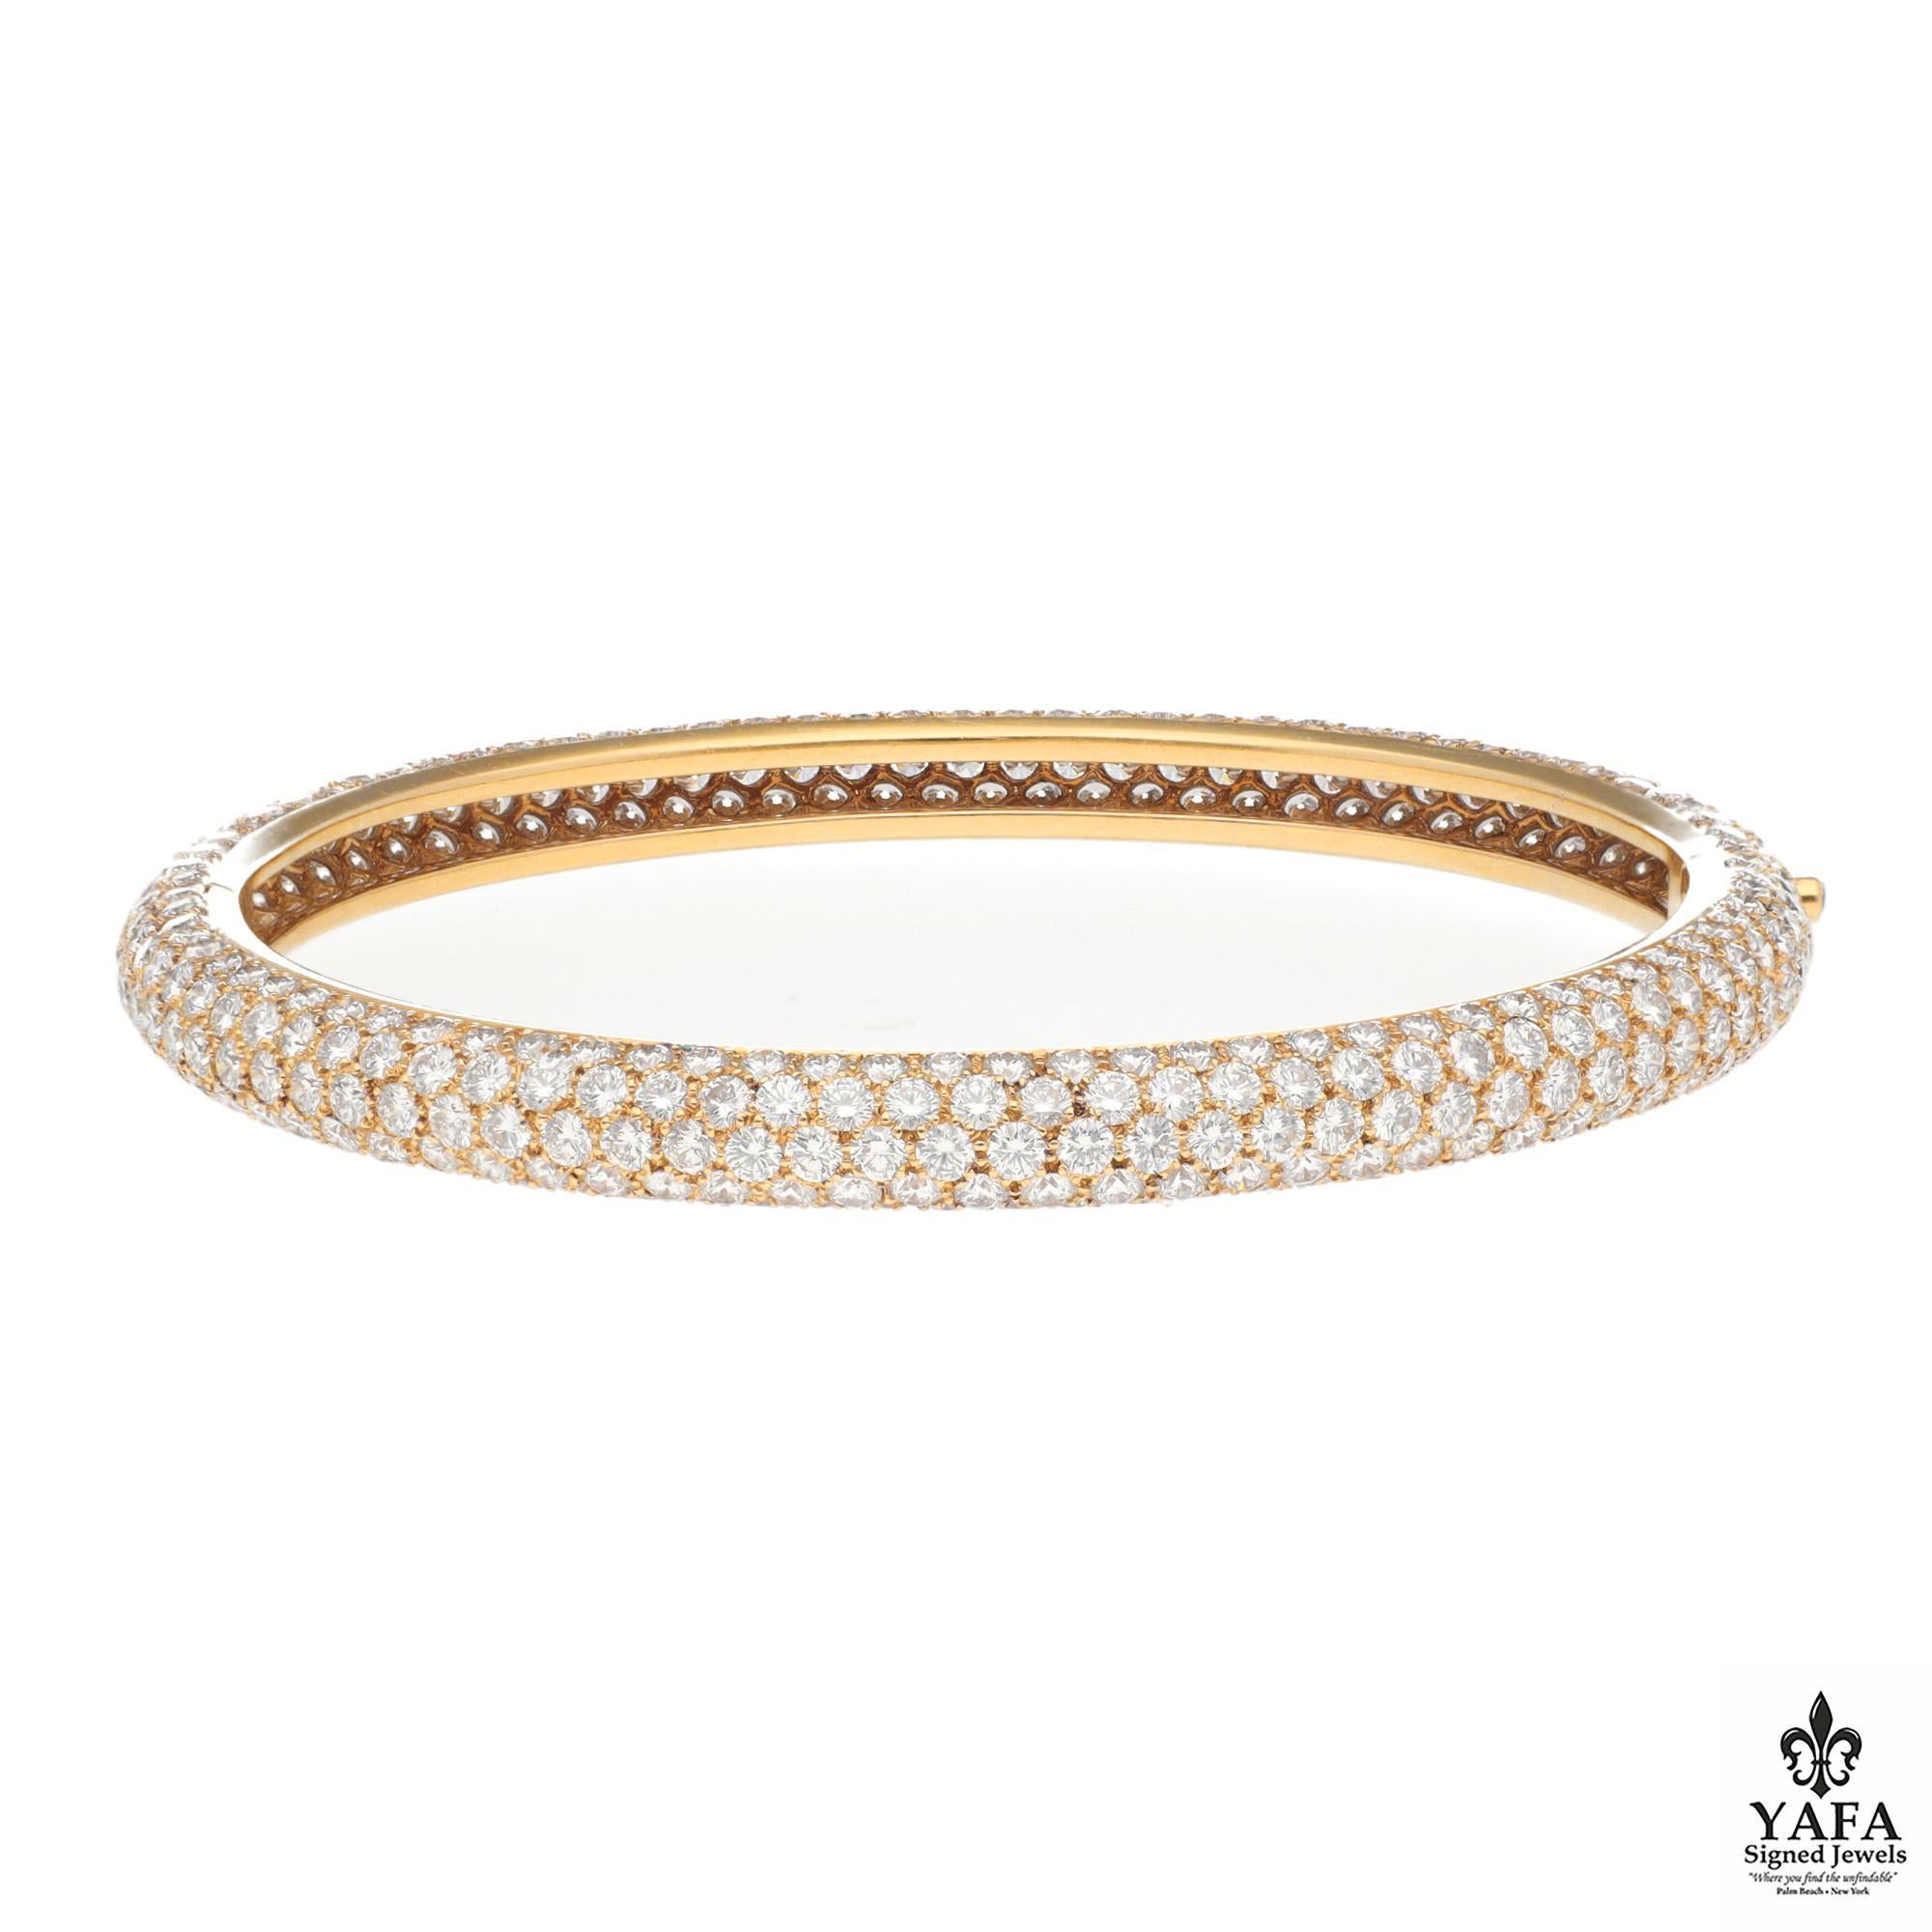 Cartier 18K Yellow Gold Diamond Pave Bangle. Pave Diamonds with a Total Weight of 10.00 CTS Surround the Entirety of This Sleek and Elegant Cartier Creation. Approximate Inner Circumference - 6.50